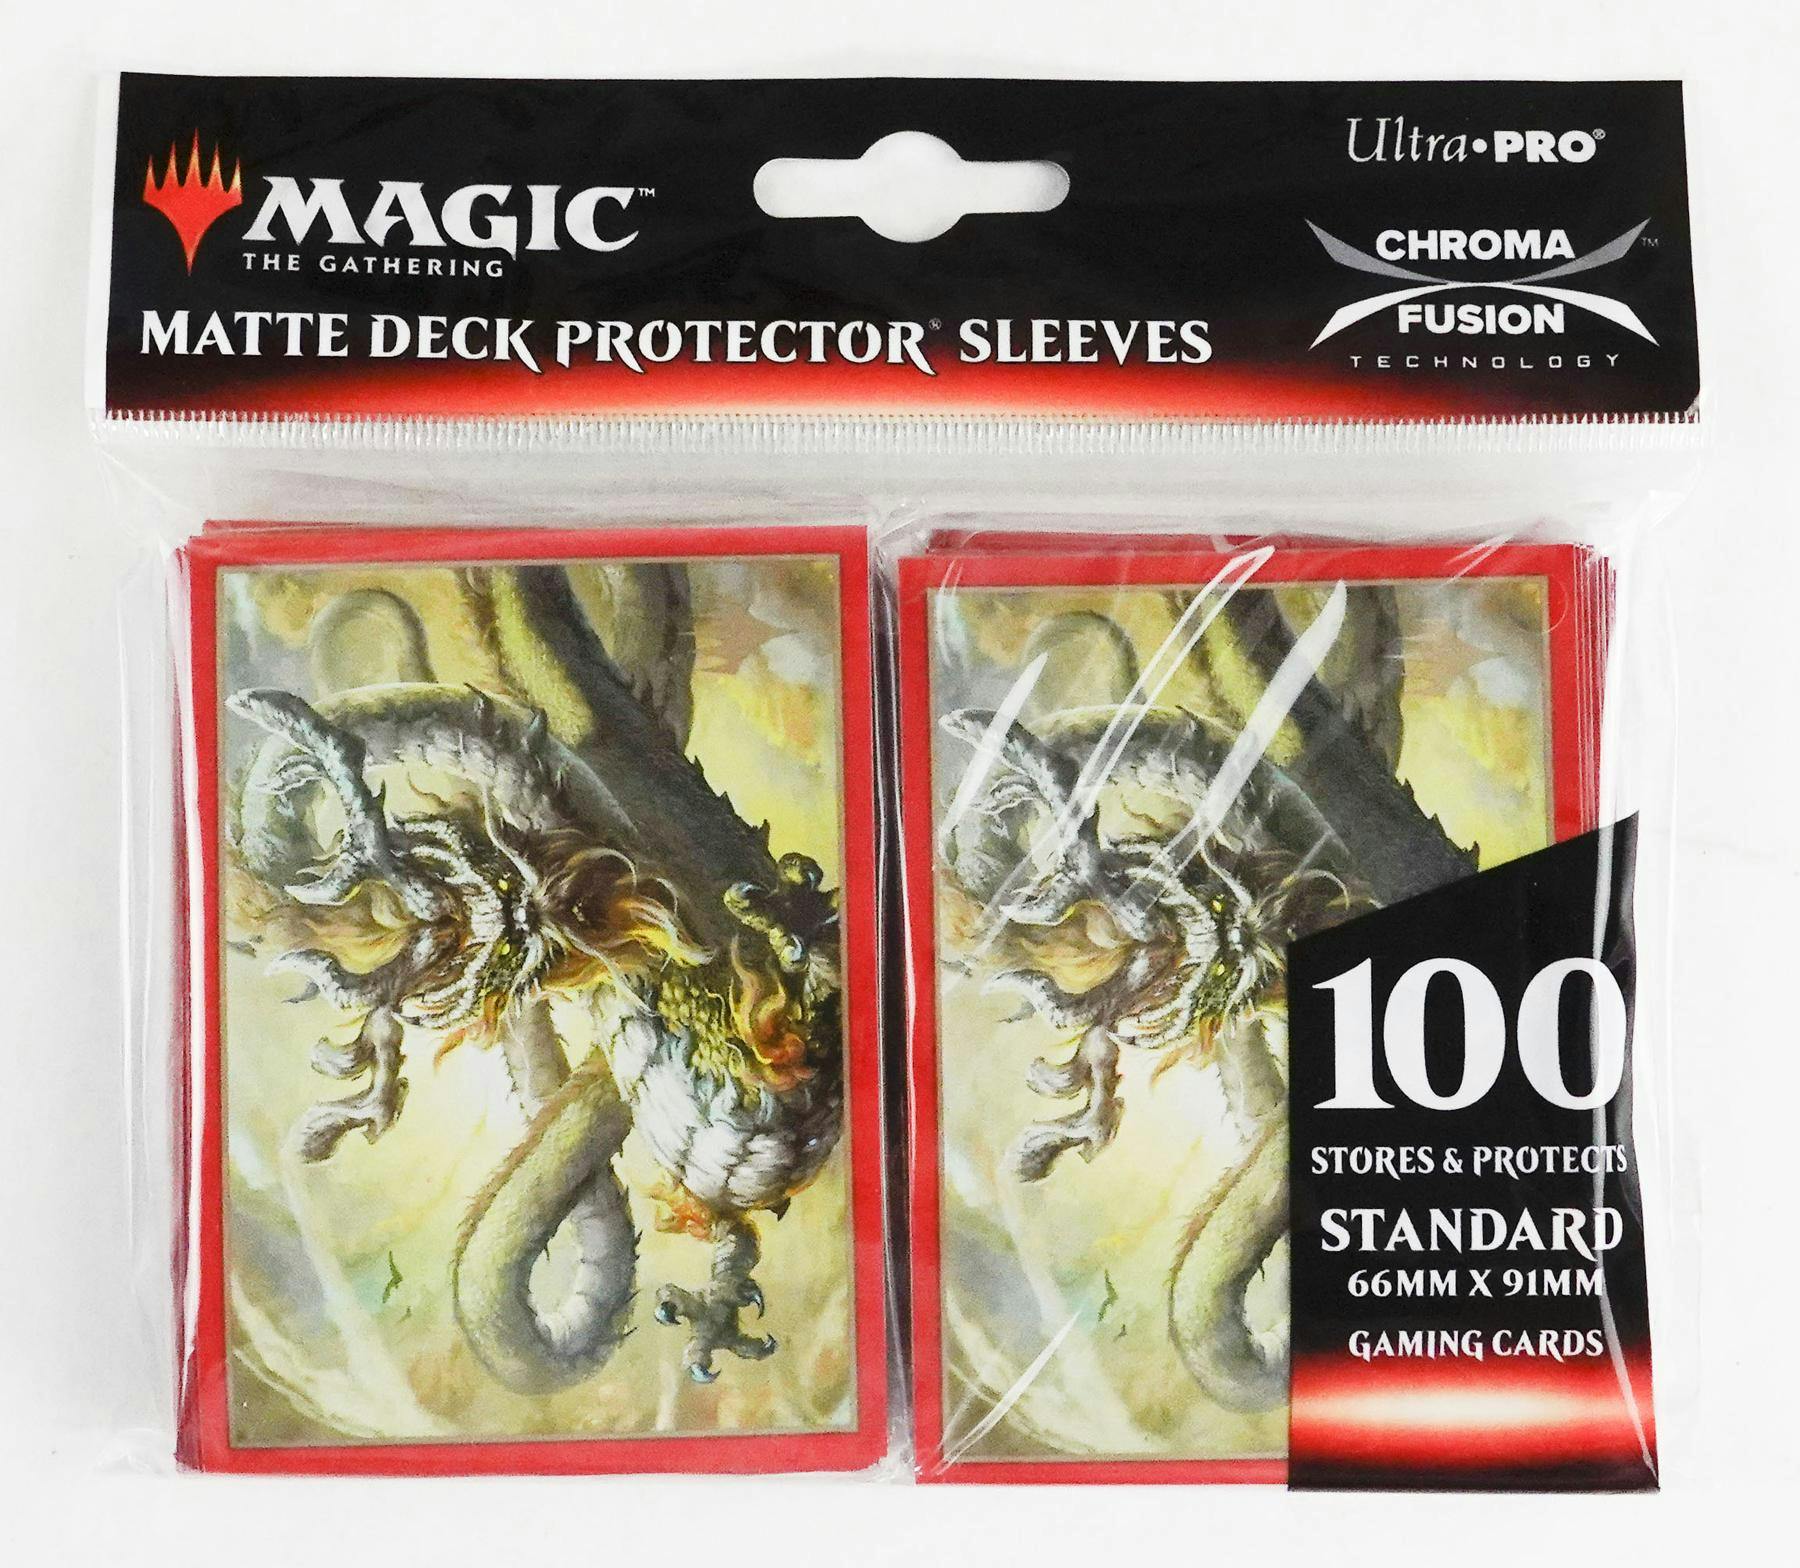 Card Sleeves Ultra Pro 100 st